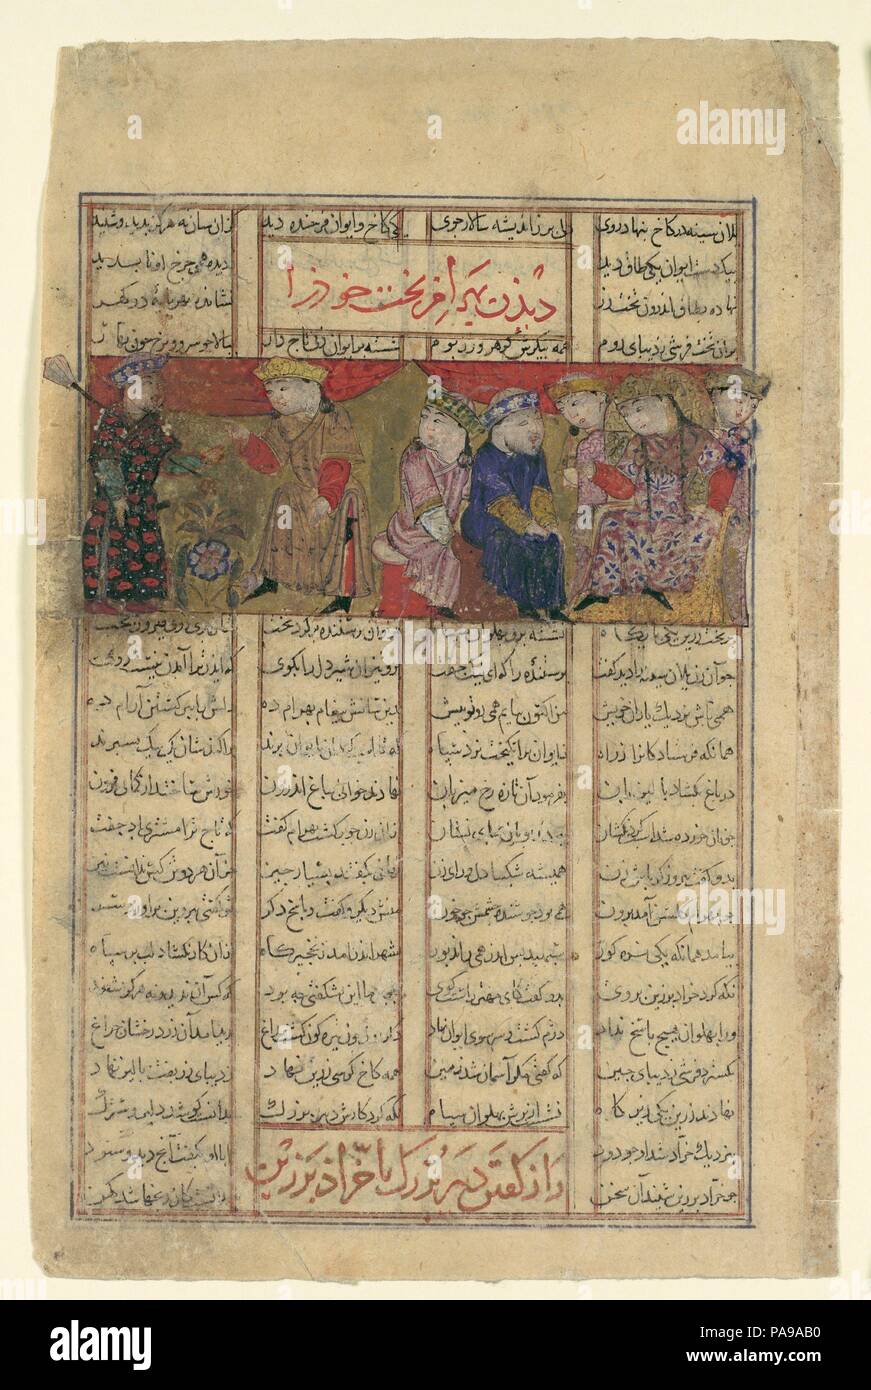 'Bahram Chubina Meets a Lady who Foretells his Fate', Folio from a Shahnama (Book of Kings). Author: Abu'l Qasim Firdausi (935-1020). Dimensions: Page: 8 x 5 1/4 in. (20.3 x 13.4 cm)  Painting: 1 7/8 x 4 5/16 in. (4.8 x 10.9 cm). Date: ca. 1330-40.  Bahram Chubina, the commander-in-chief of the ungrateful king Hurmuzd, was led by magic to a hidden palace where a beautiful enthroned woman told him that the crown of Iran would be his.  The interaction of the figures in this picture is characteristic of this manuscript, but their identity, except for those of the enthroned lady and her two guardi Stock Photo